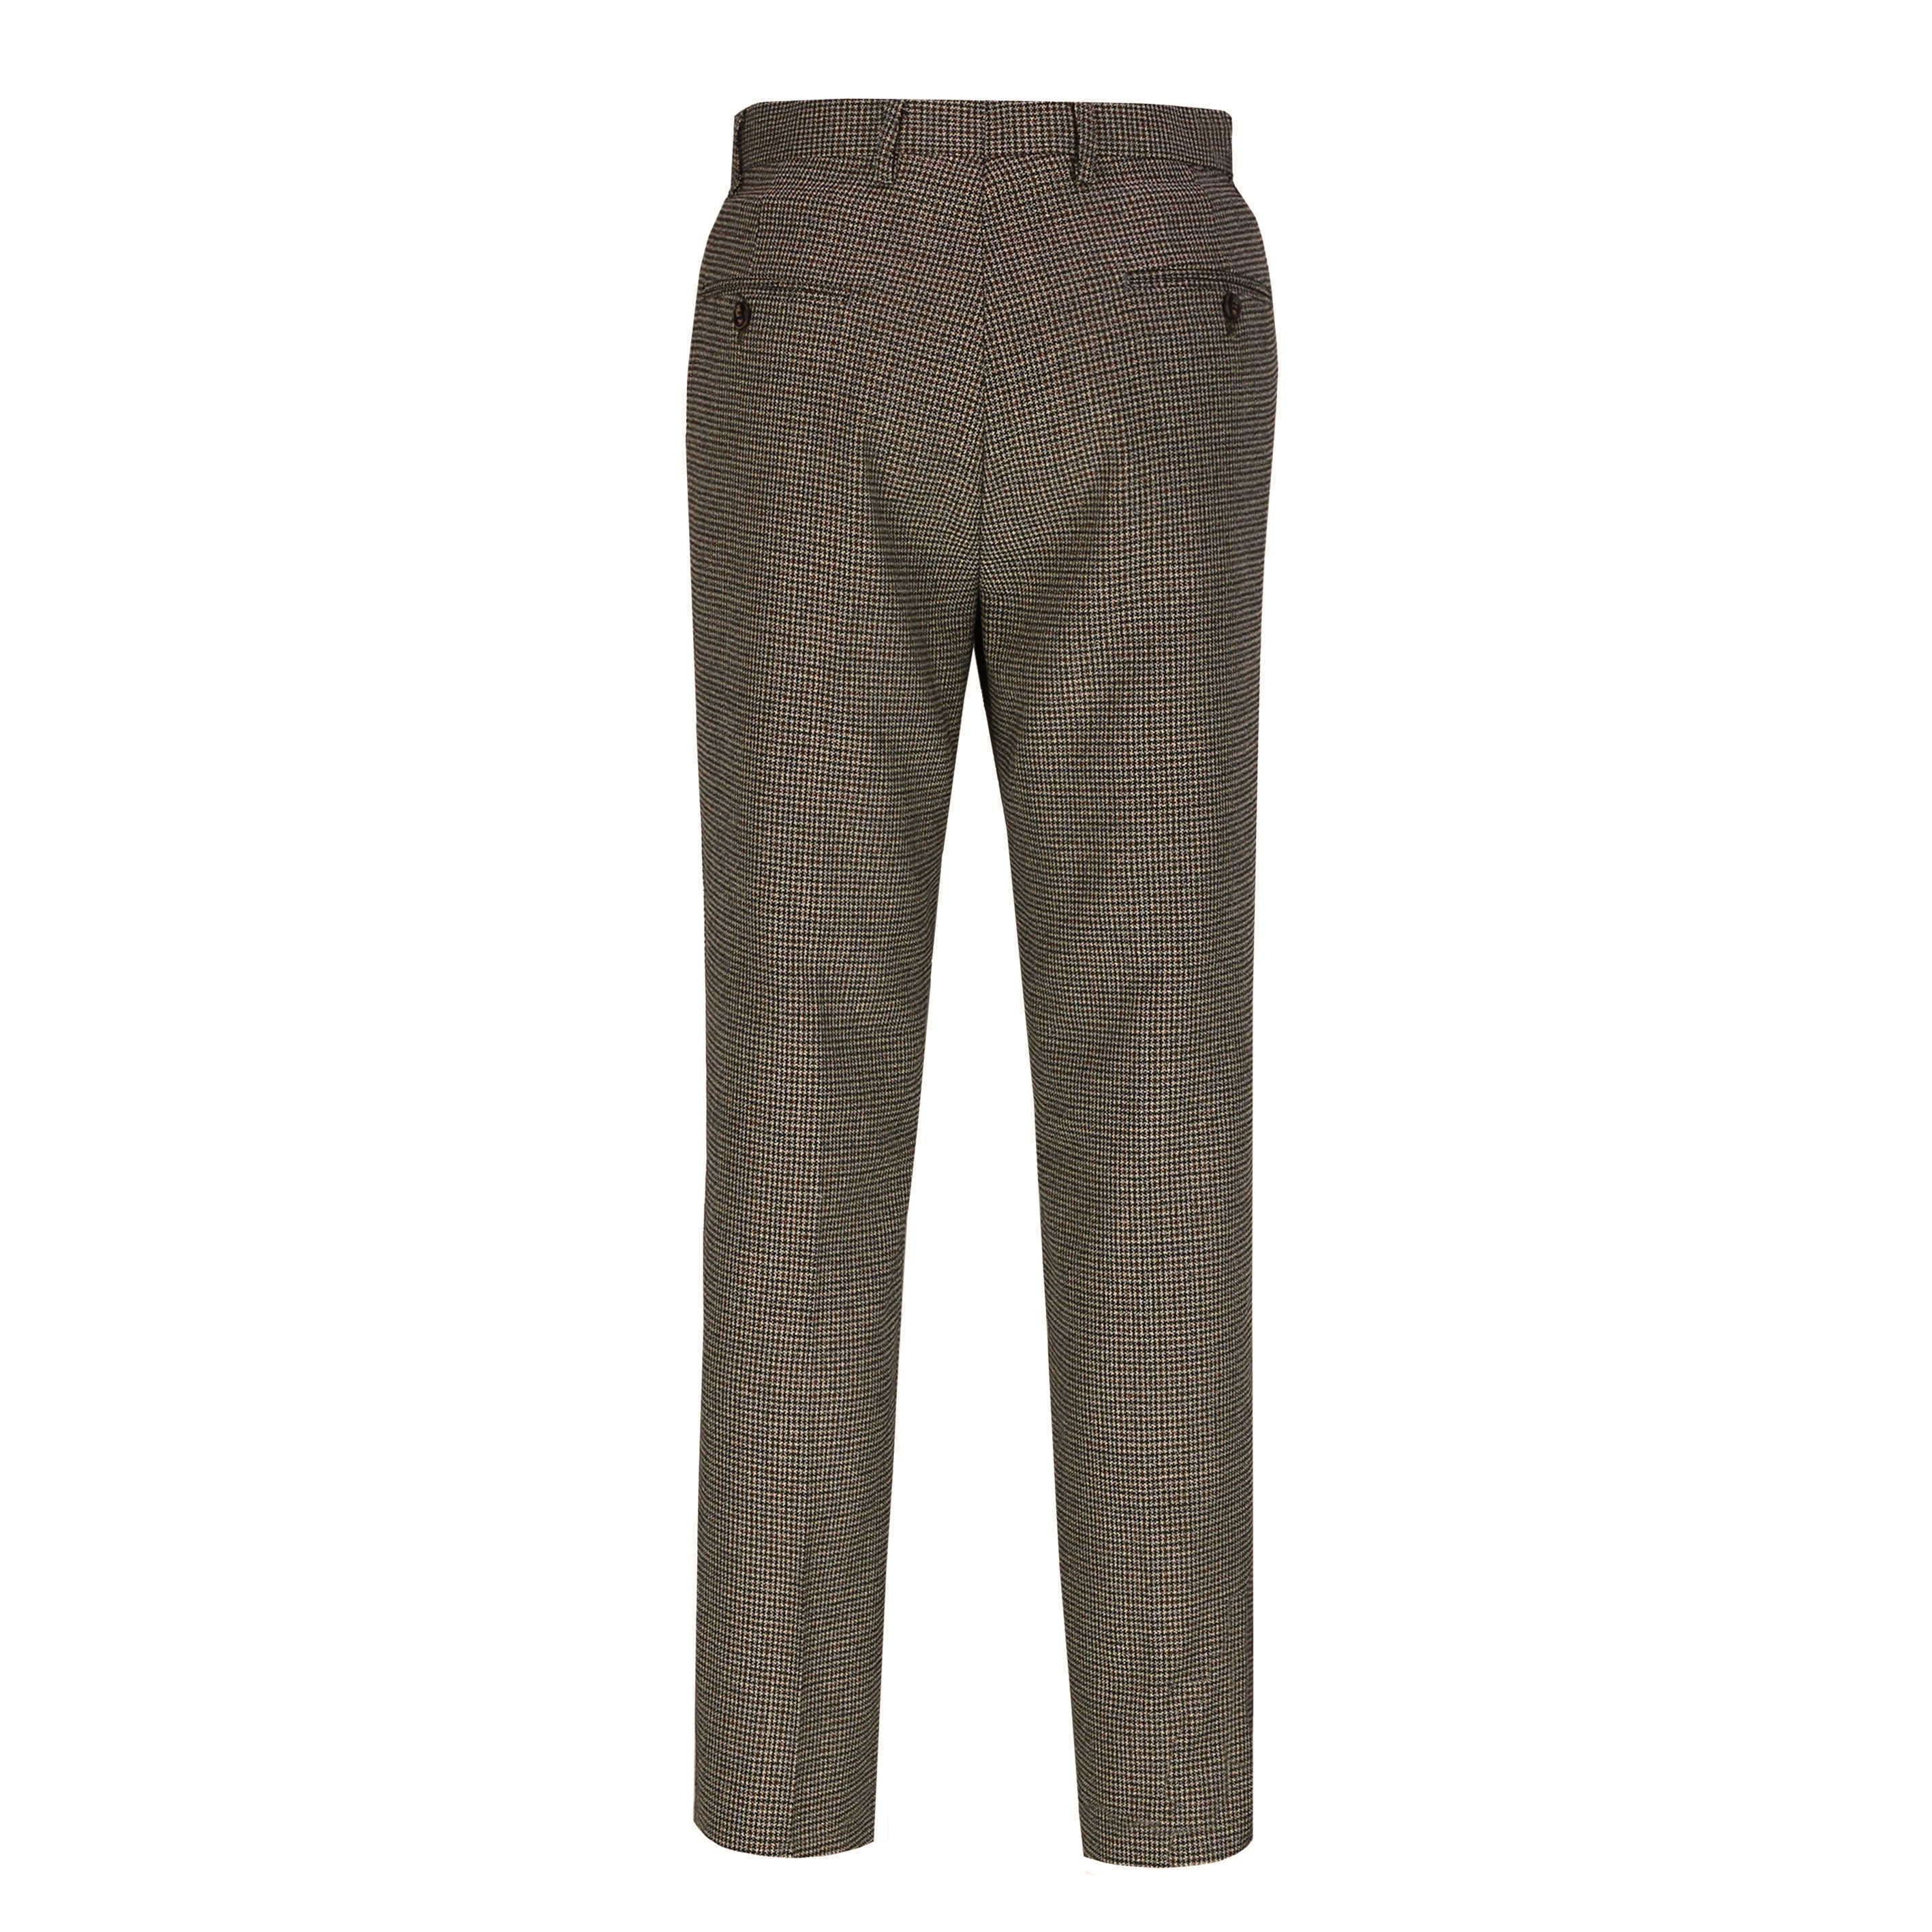 Mens Dogtooth Trousers Vintage Check Tweed Peaky Blinder Tailored Fit ...